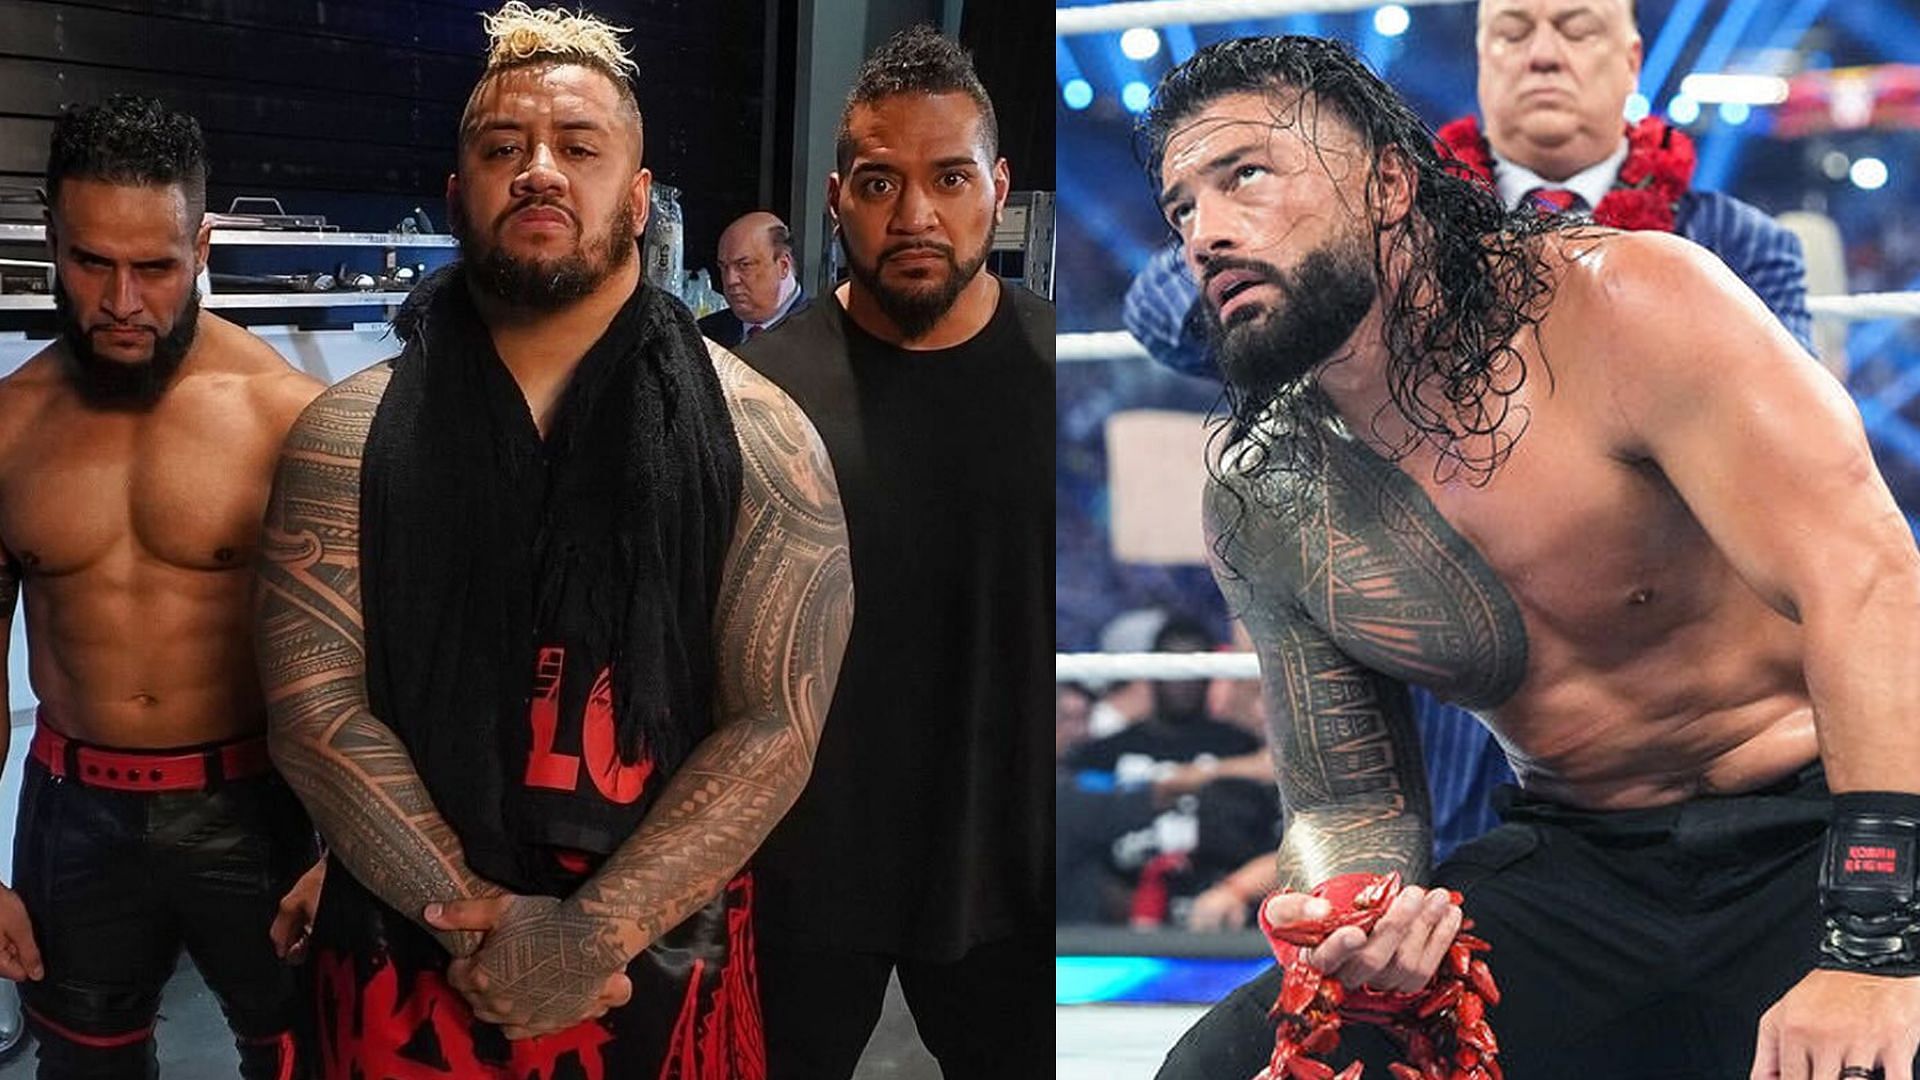 Roman Reigns fans could suffer another heartbreak due to Solo Sikoa